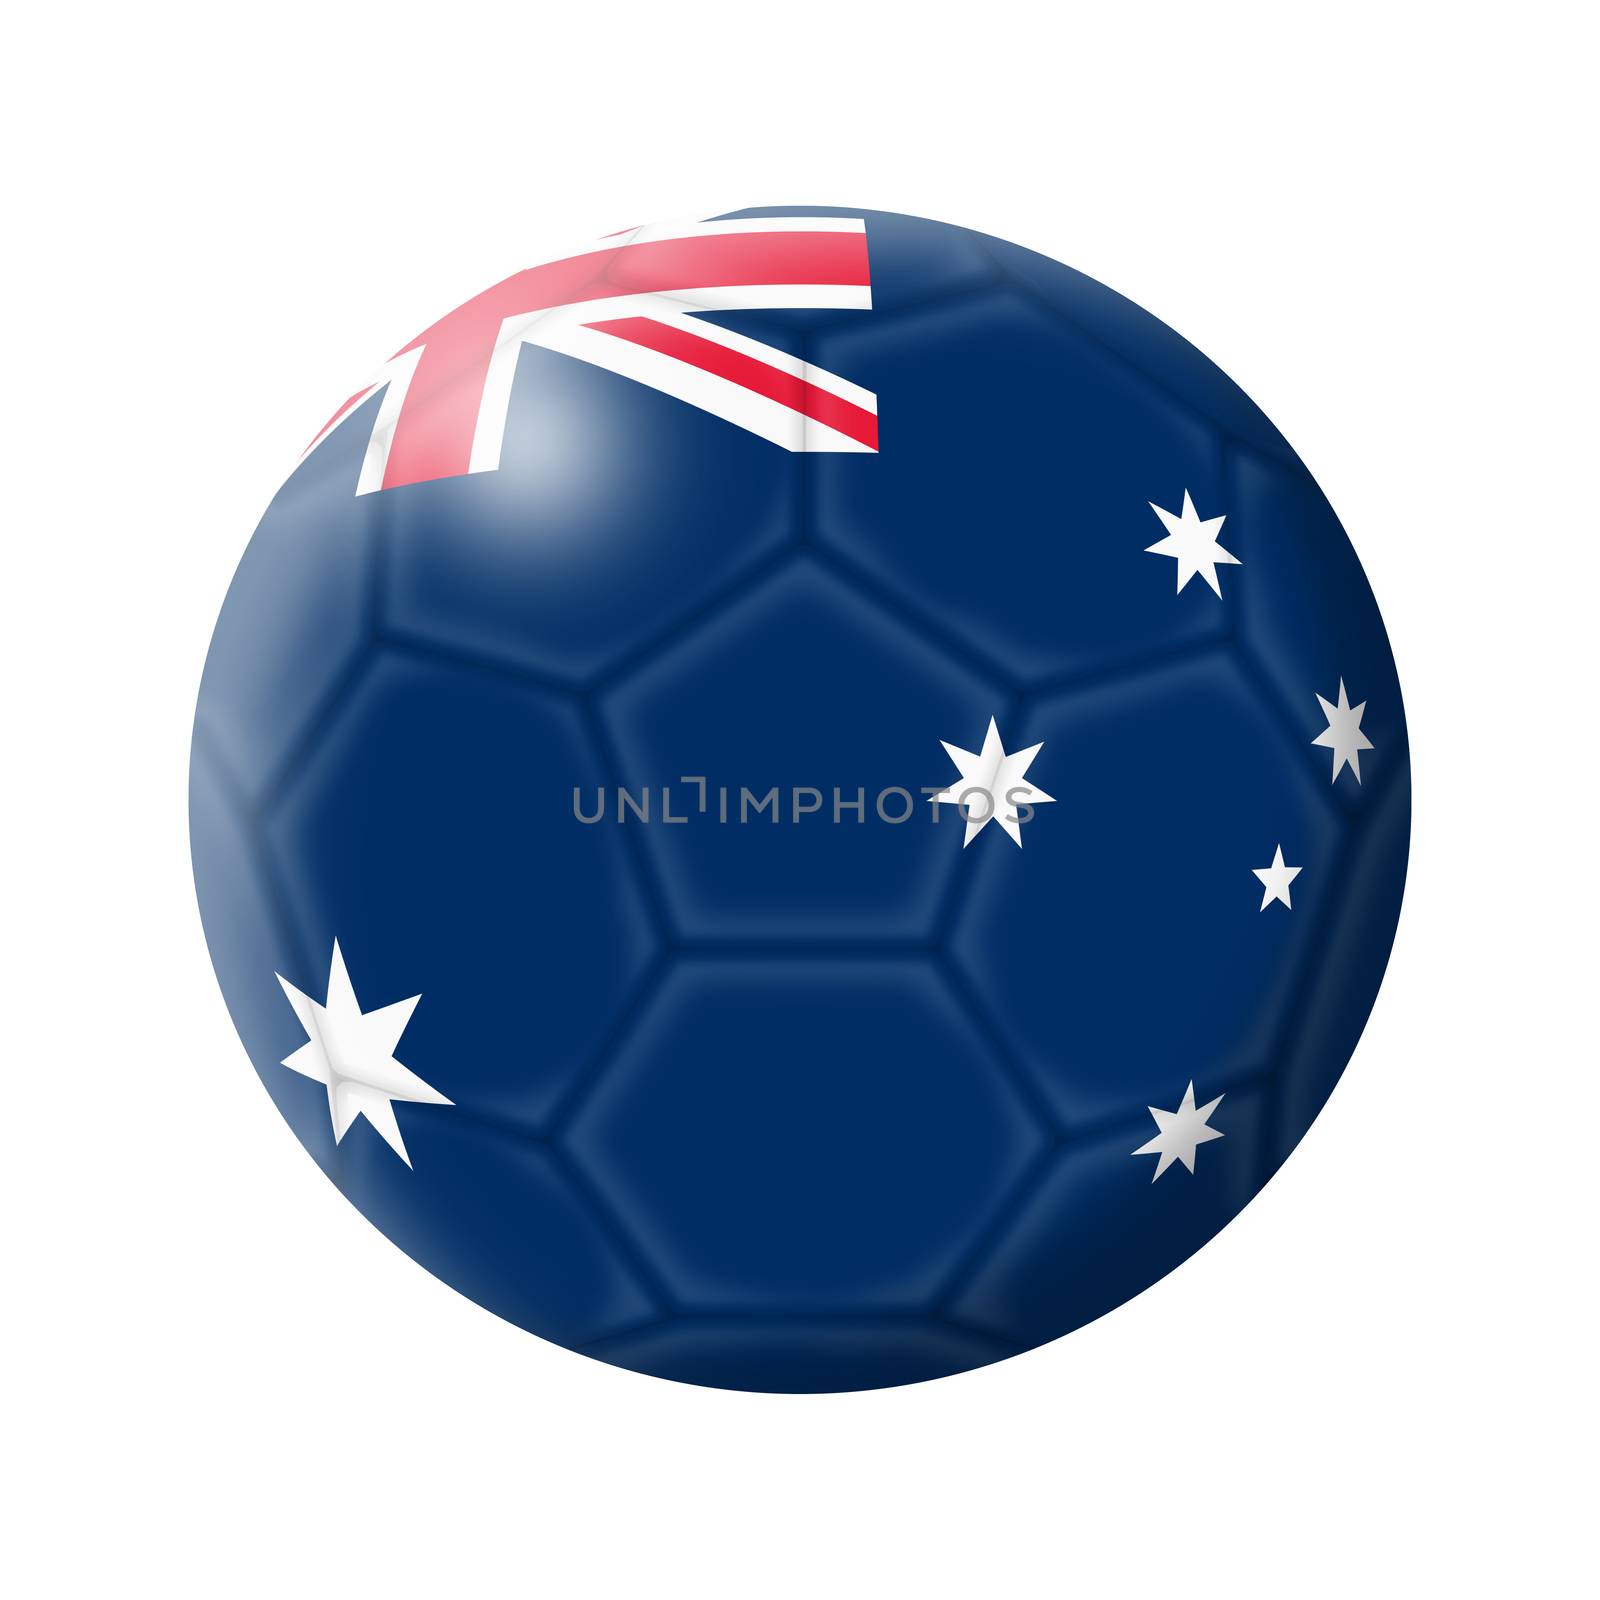 Australia soccer ball football 3d illustration isolated on white with clipping path by VivacityImages